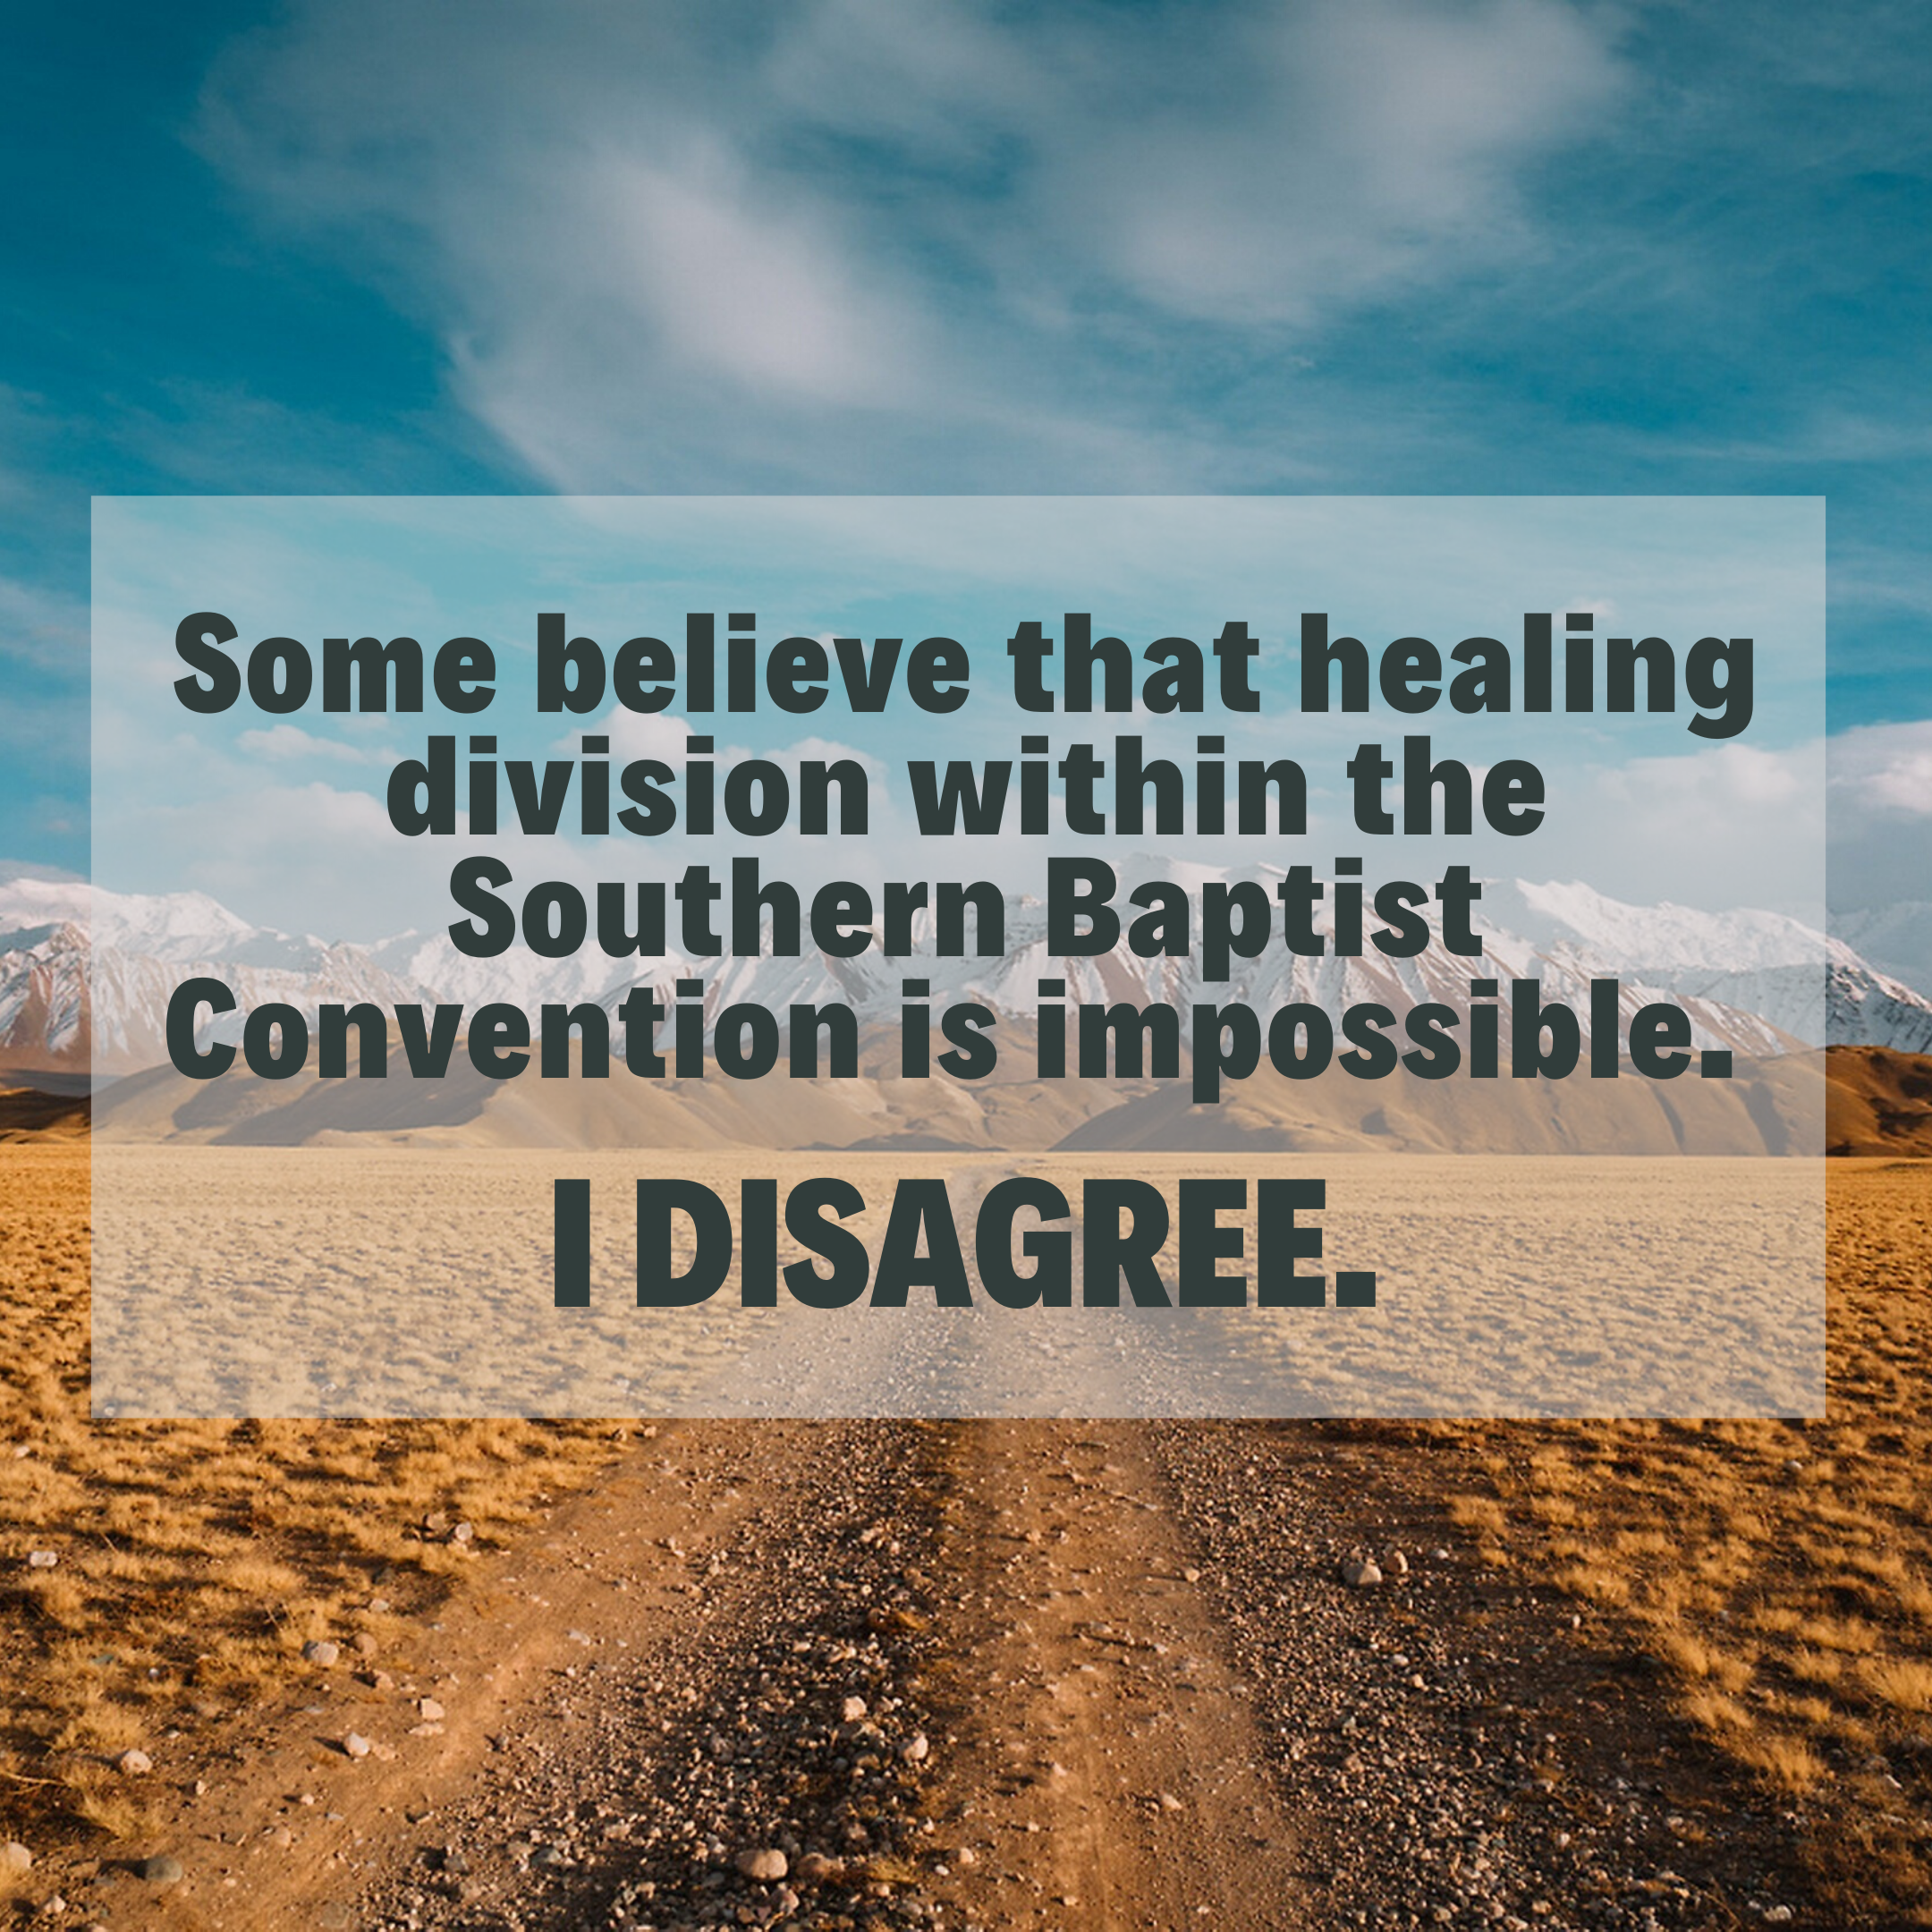 Some believe that healing division within the Southern Baptist Convention is impossible. I disagree.